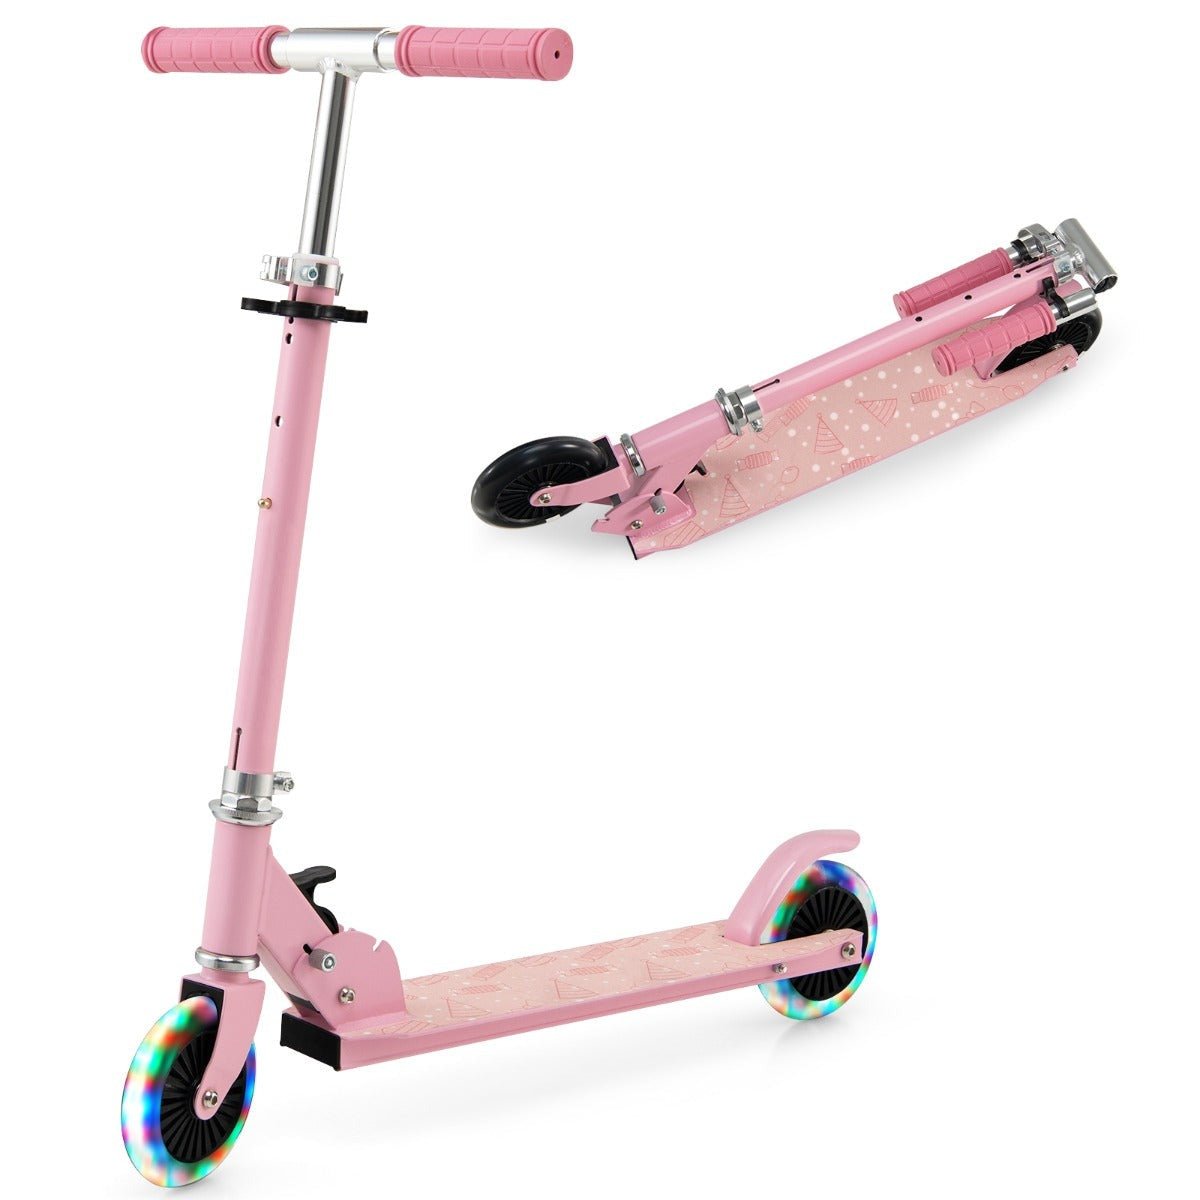 Get Rolling with a Pink Kick Scooter for Kids - Shop Now!